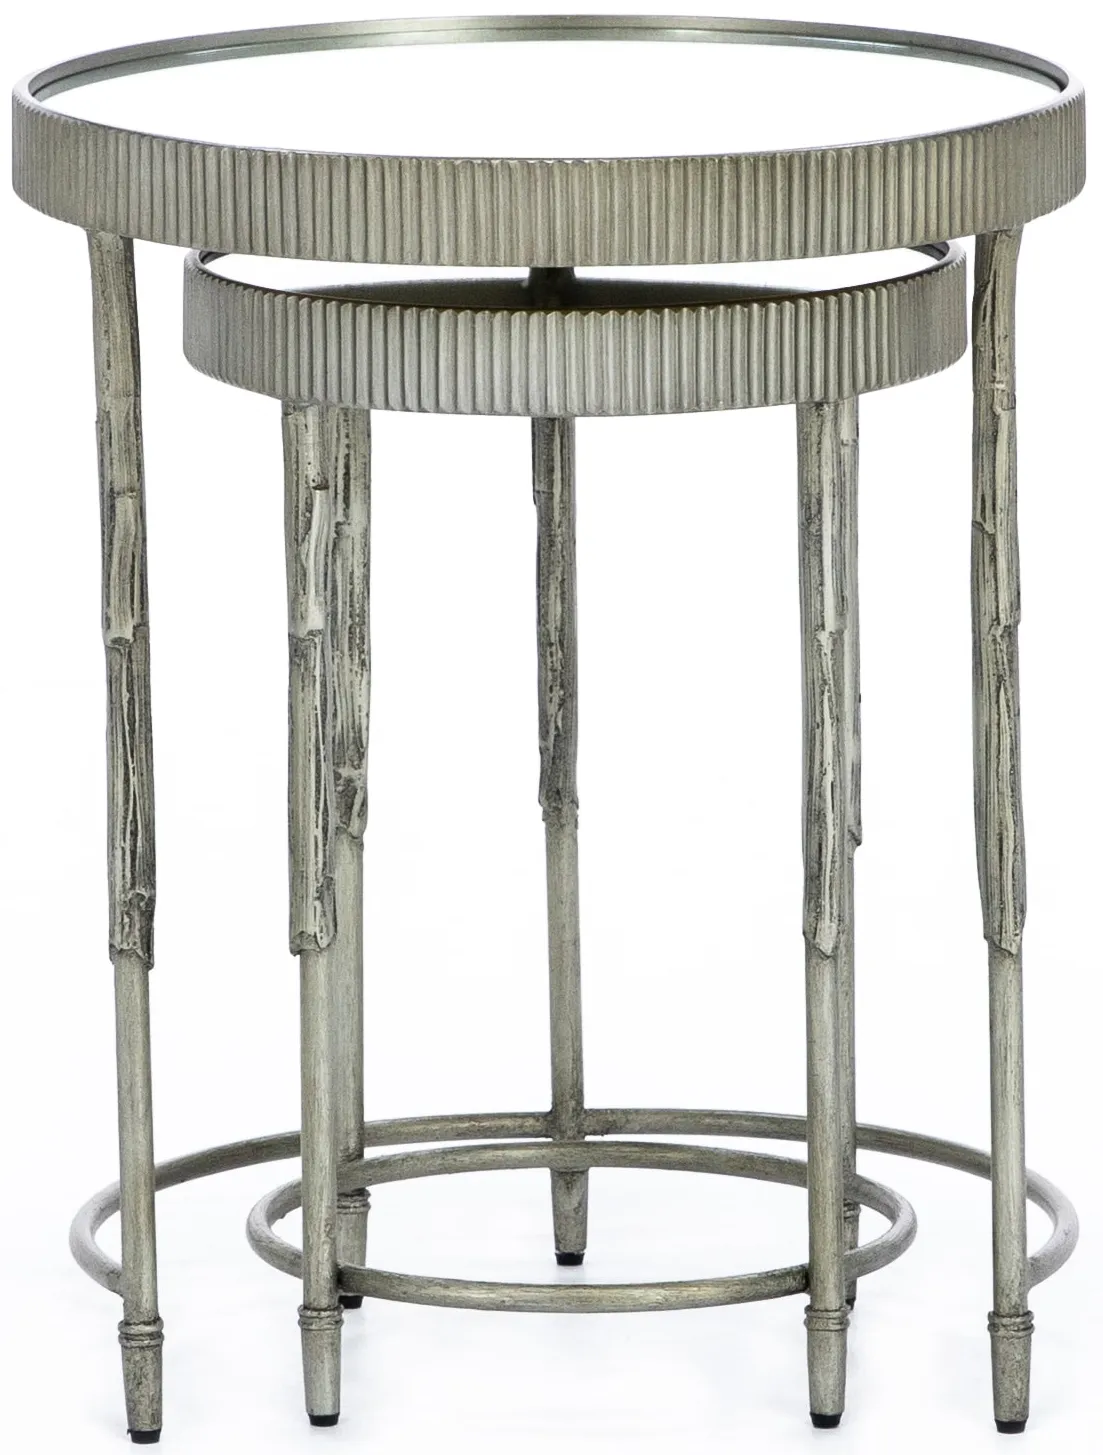 Grand Luxe Silver Nesting Tables